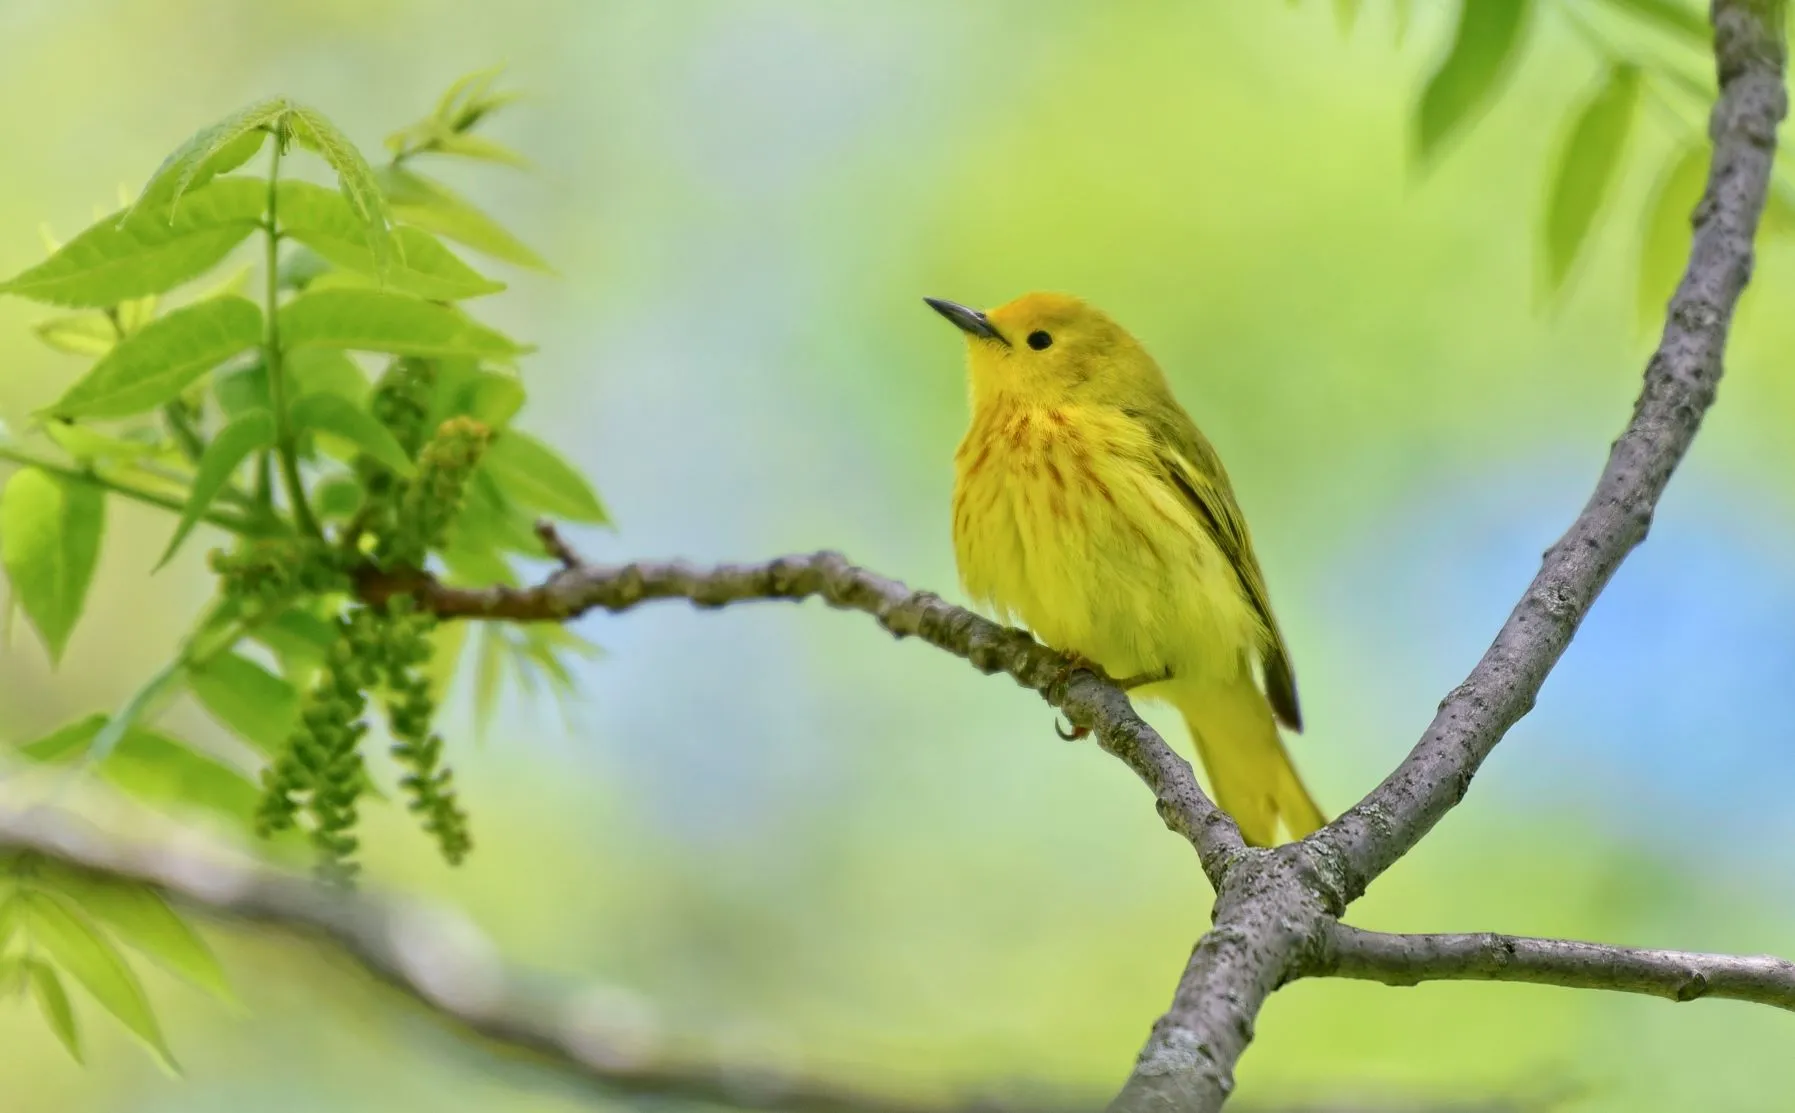 These yellow warbler facts are all about their bright color and interesting appearance.